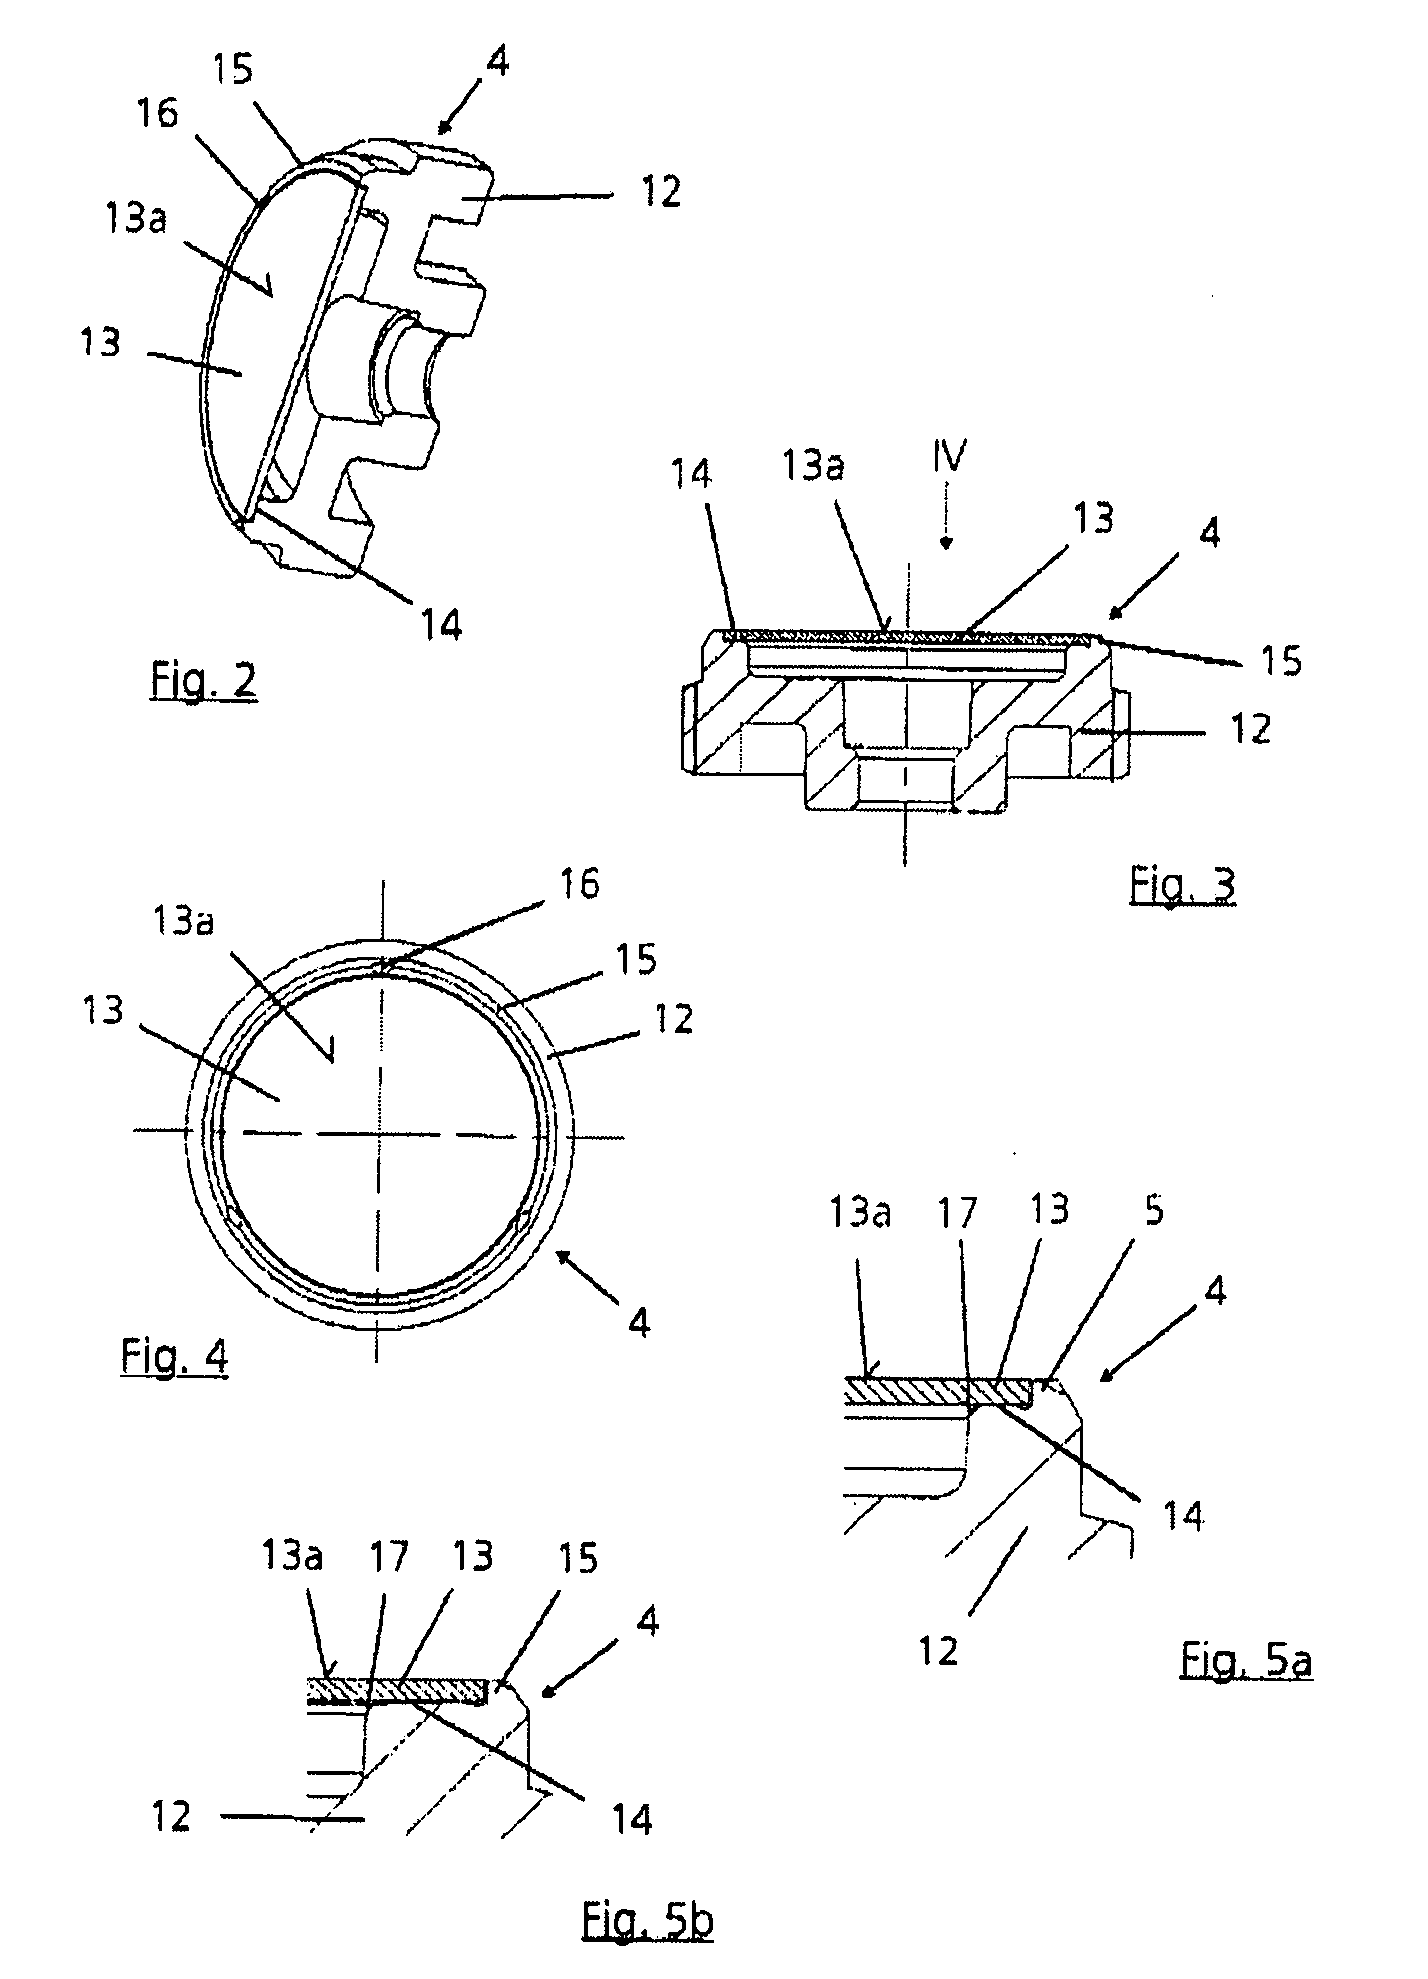 Device for Pressing on a Steering Rack